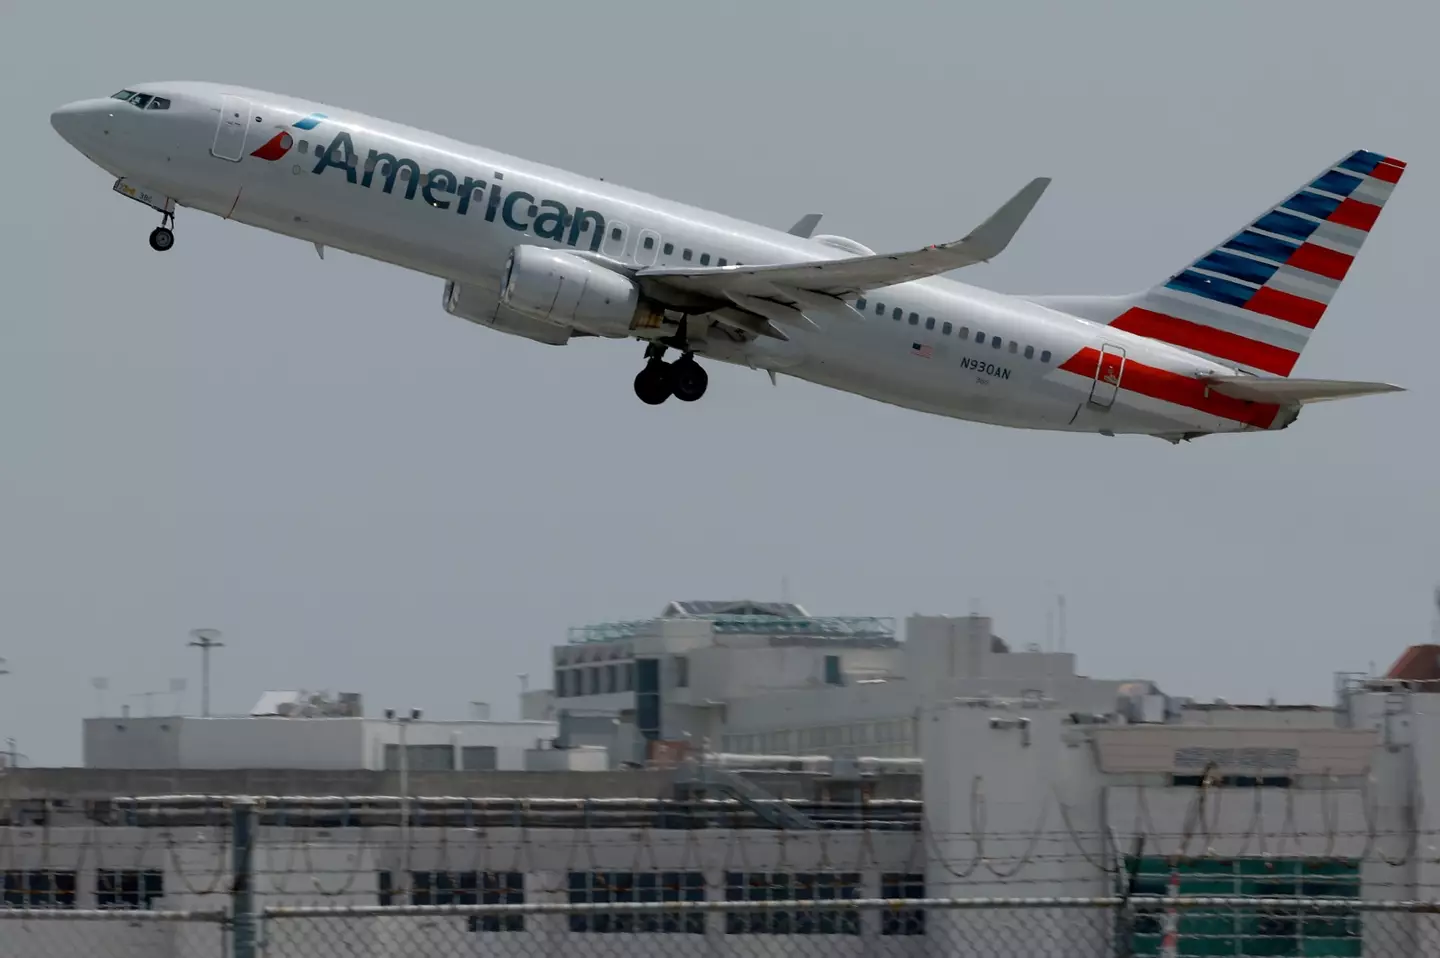 The American Airlines flight had just left Los Angeles.